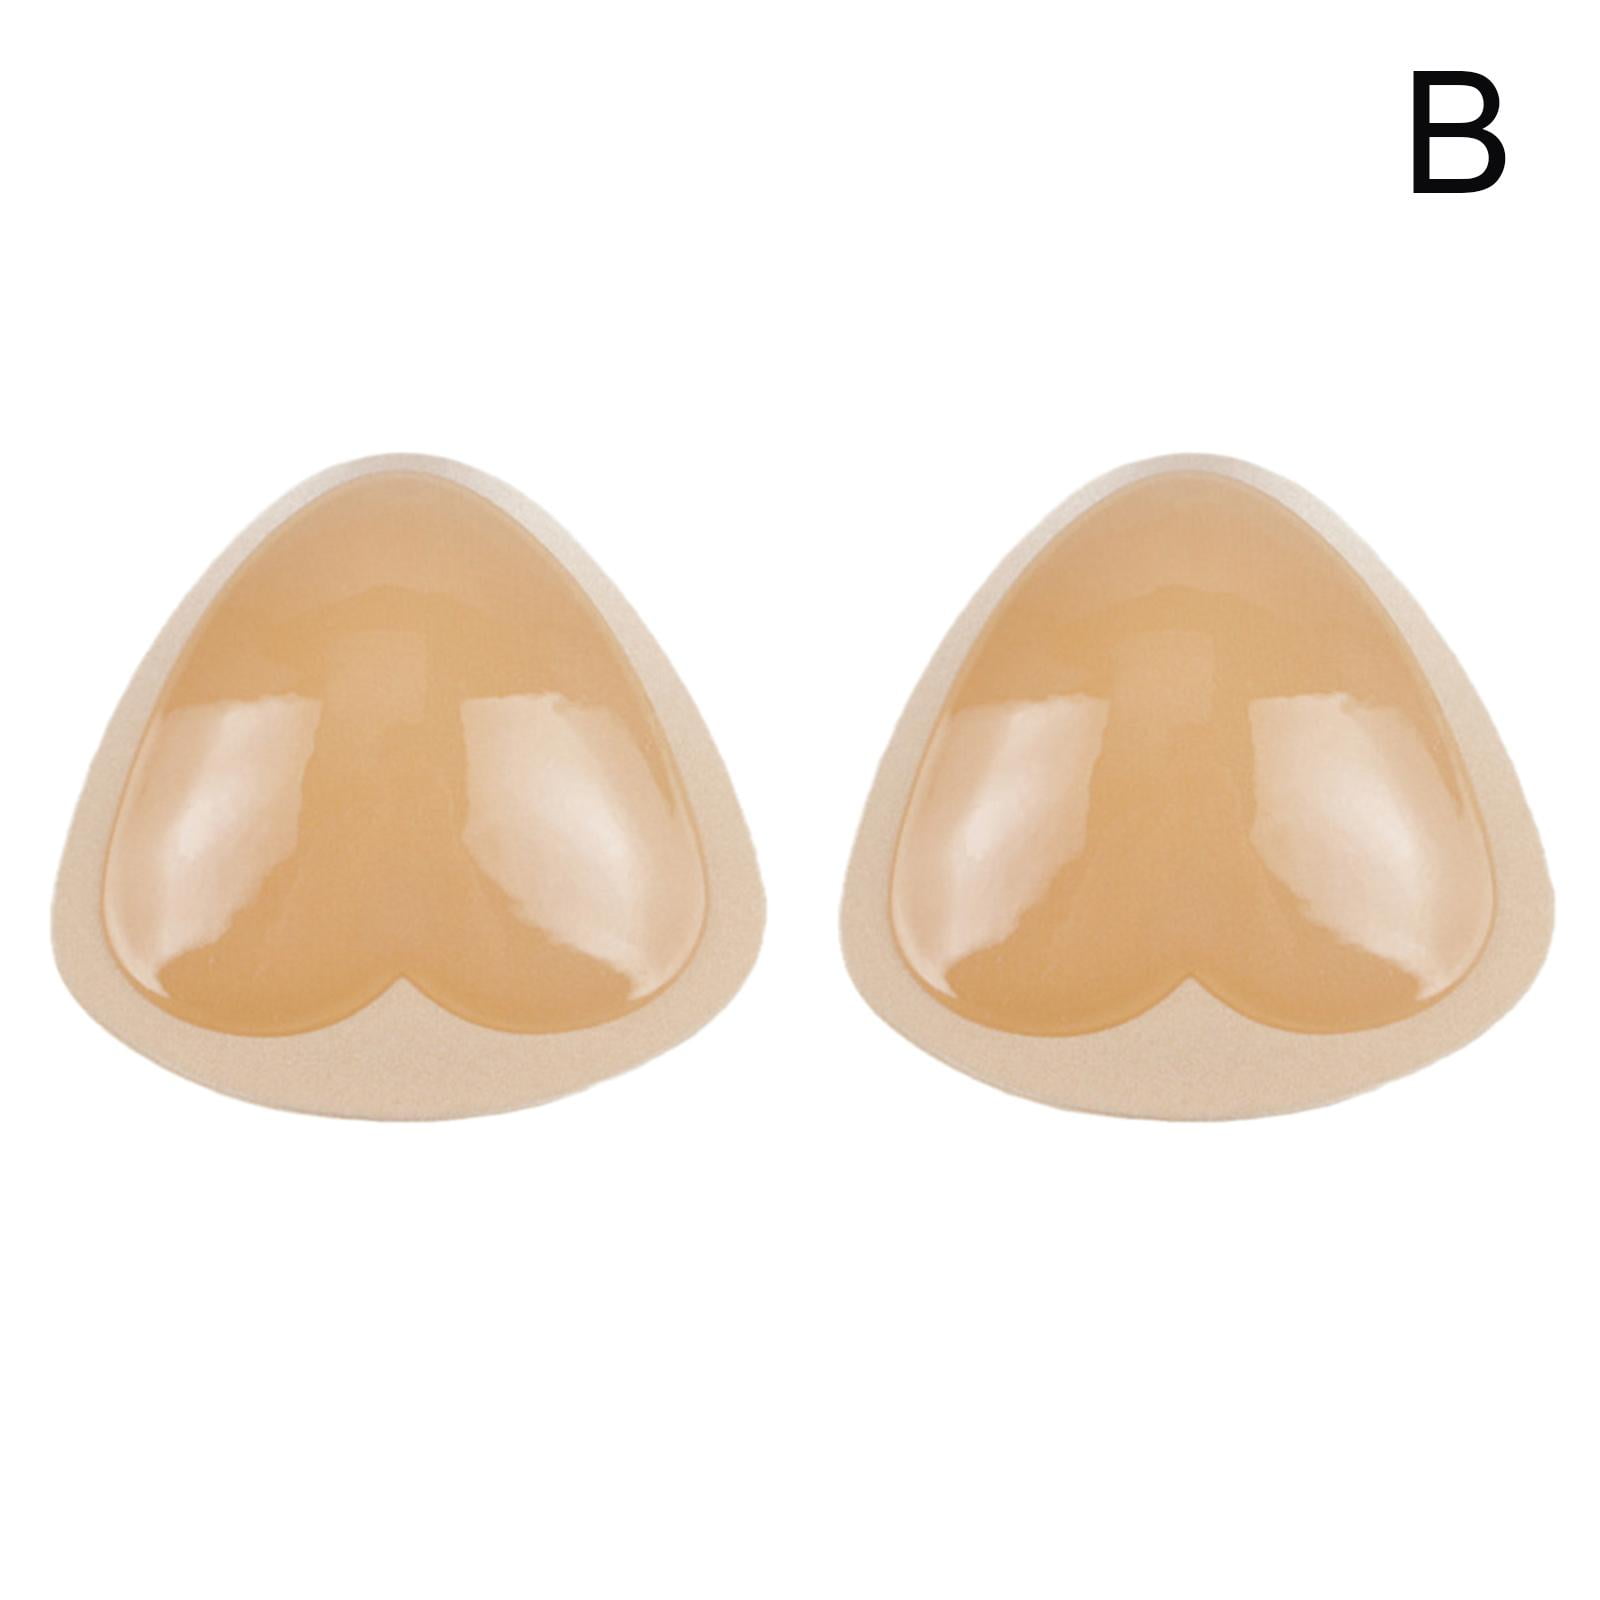 Silicone Adhesive Bra Pads Breast Inserts Removable Triangle Push